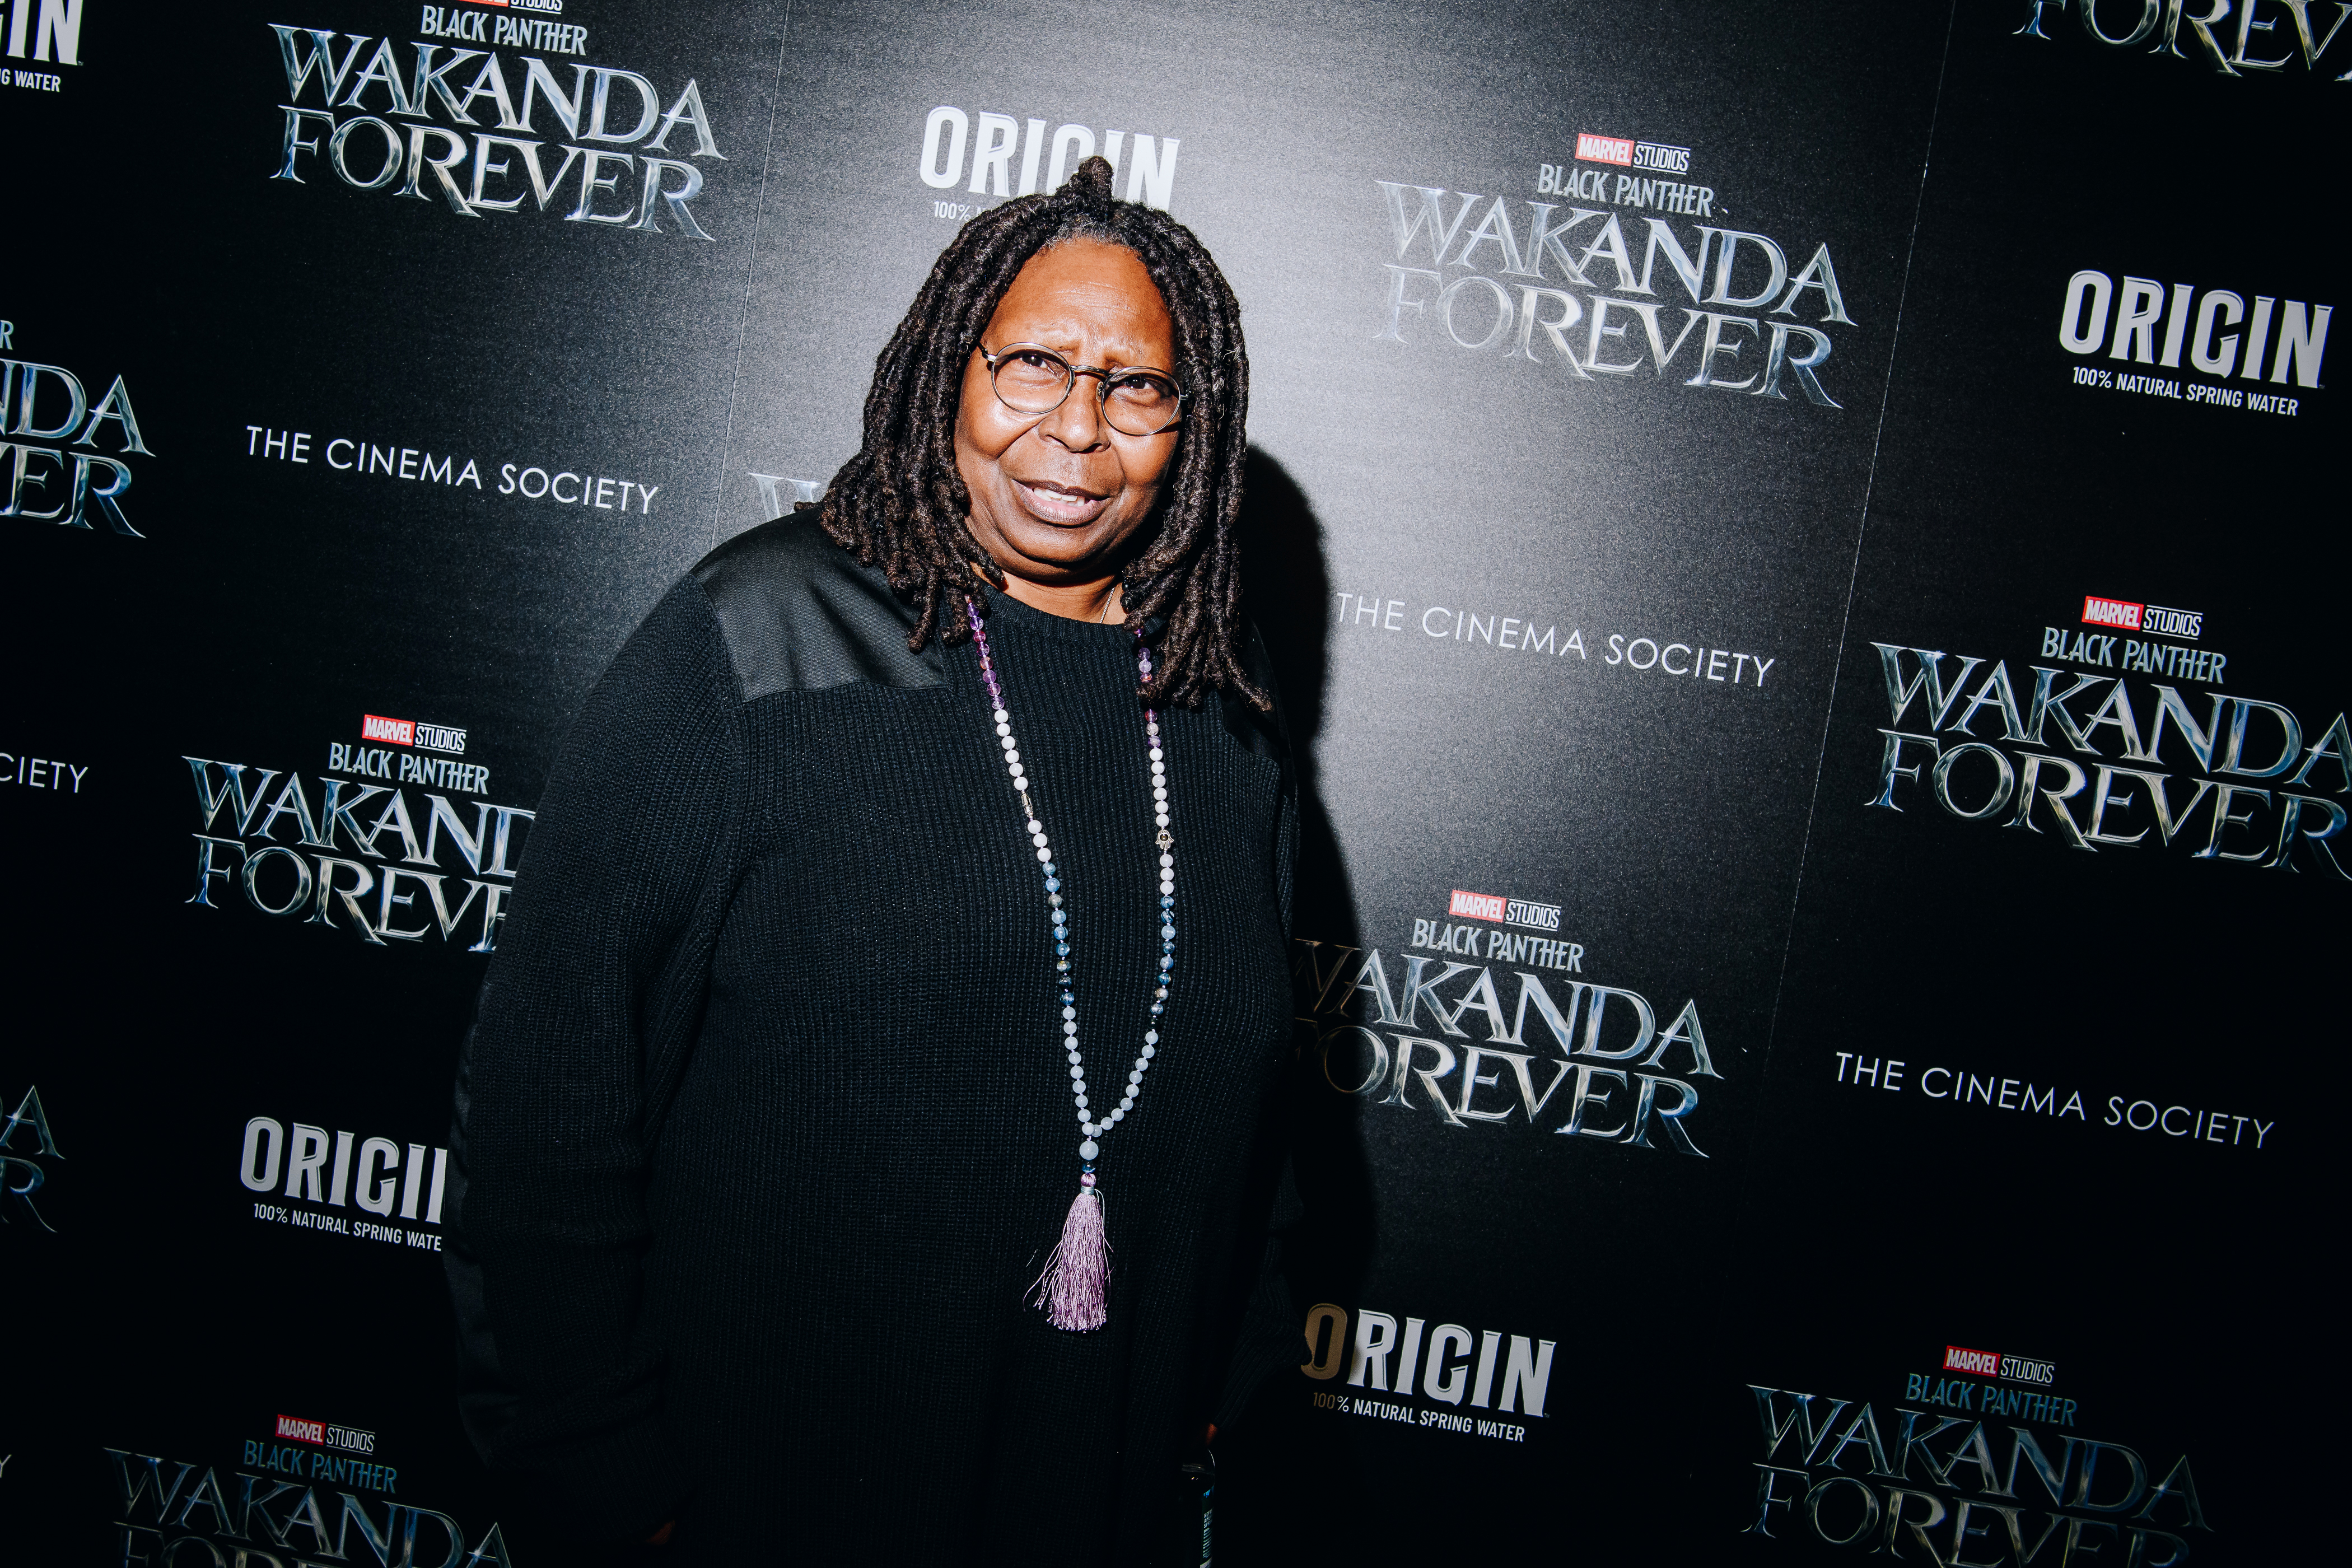 Whoopi Goldberg at a special screening of "Black Panther: Wakanda Forever" on November 1, 2022 | Source: Getty Images